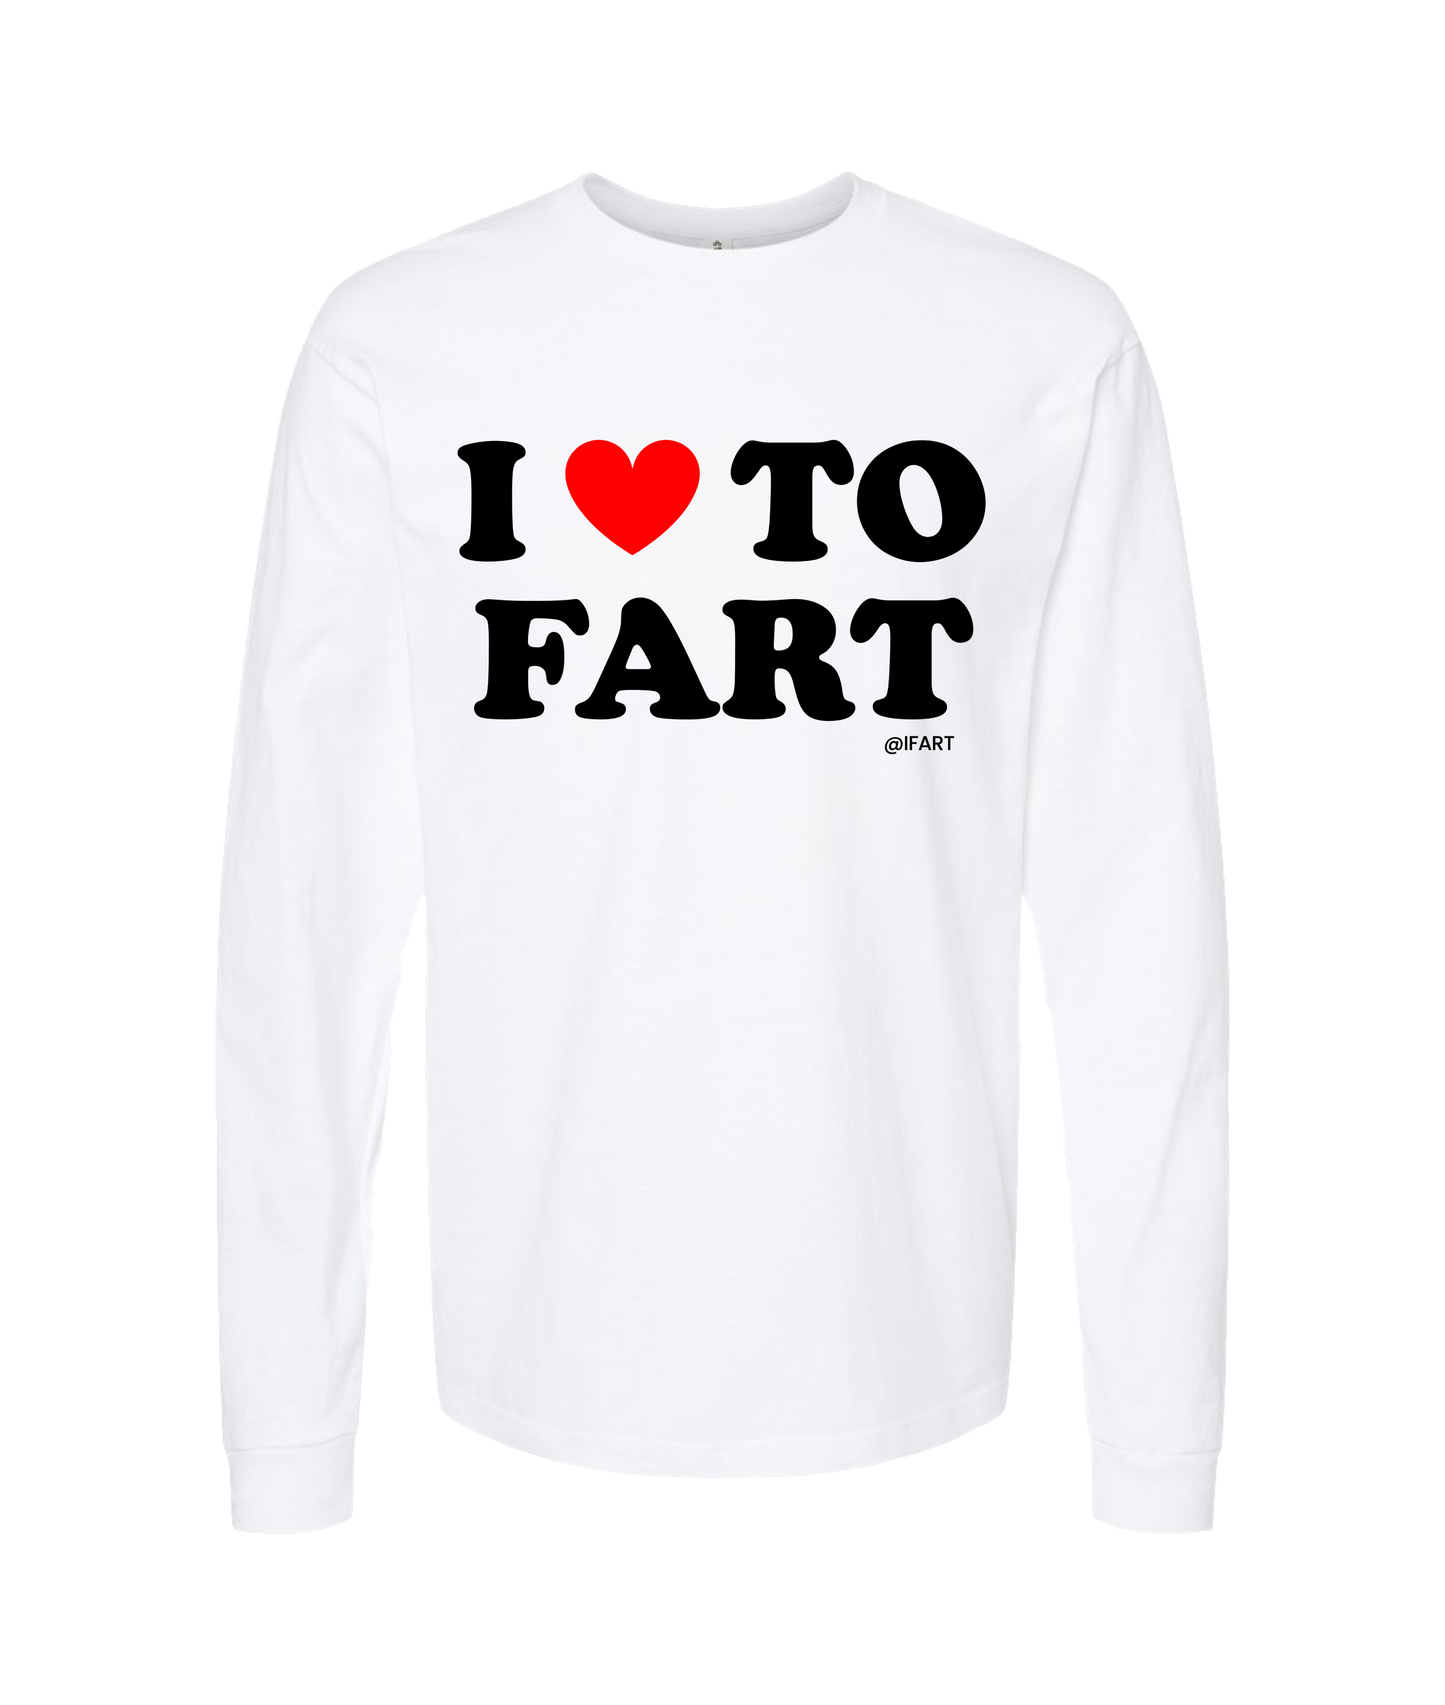 iFart - I <3 TO FART - White Long Sleeve T